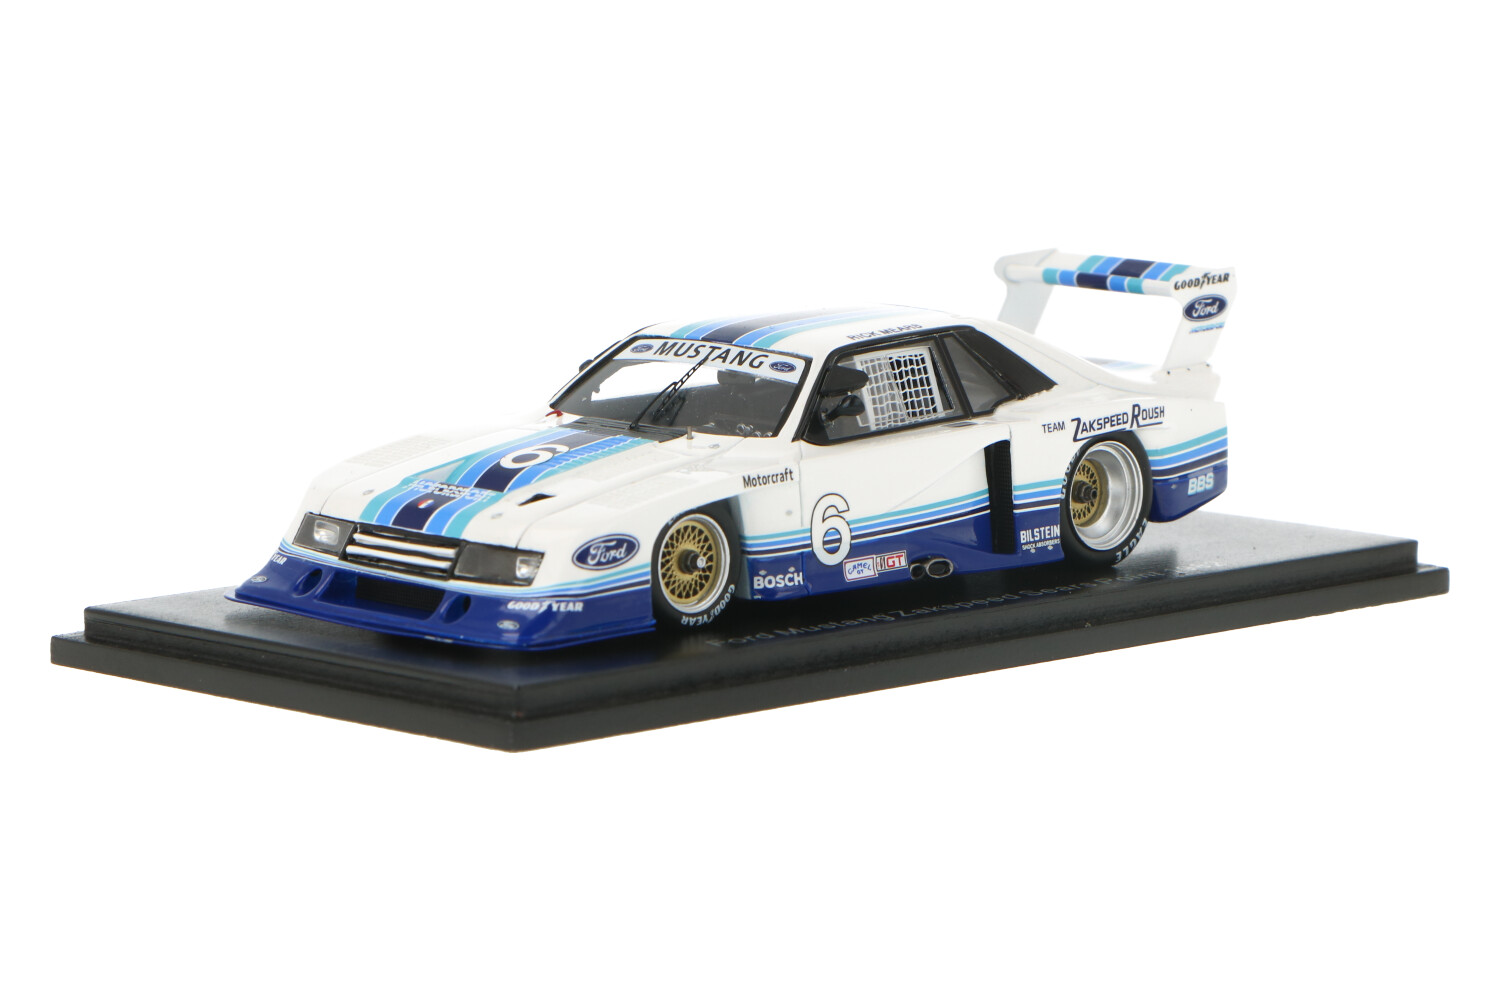 Ford-Mustang-Zakspeed-Sears-Point-S2630_13159580006926302Ford-Mustang-Zakspeed-Sears-Point-S2630_Houseofmodelcars_.jpg